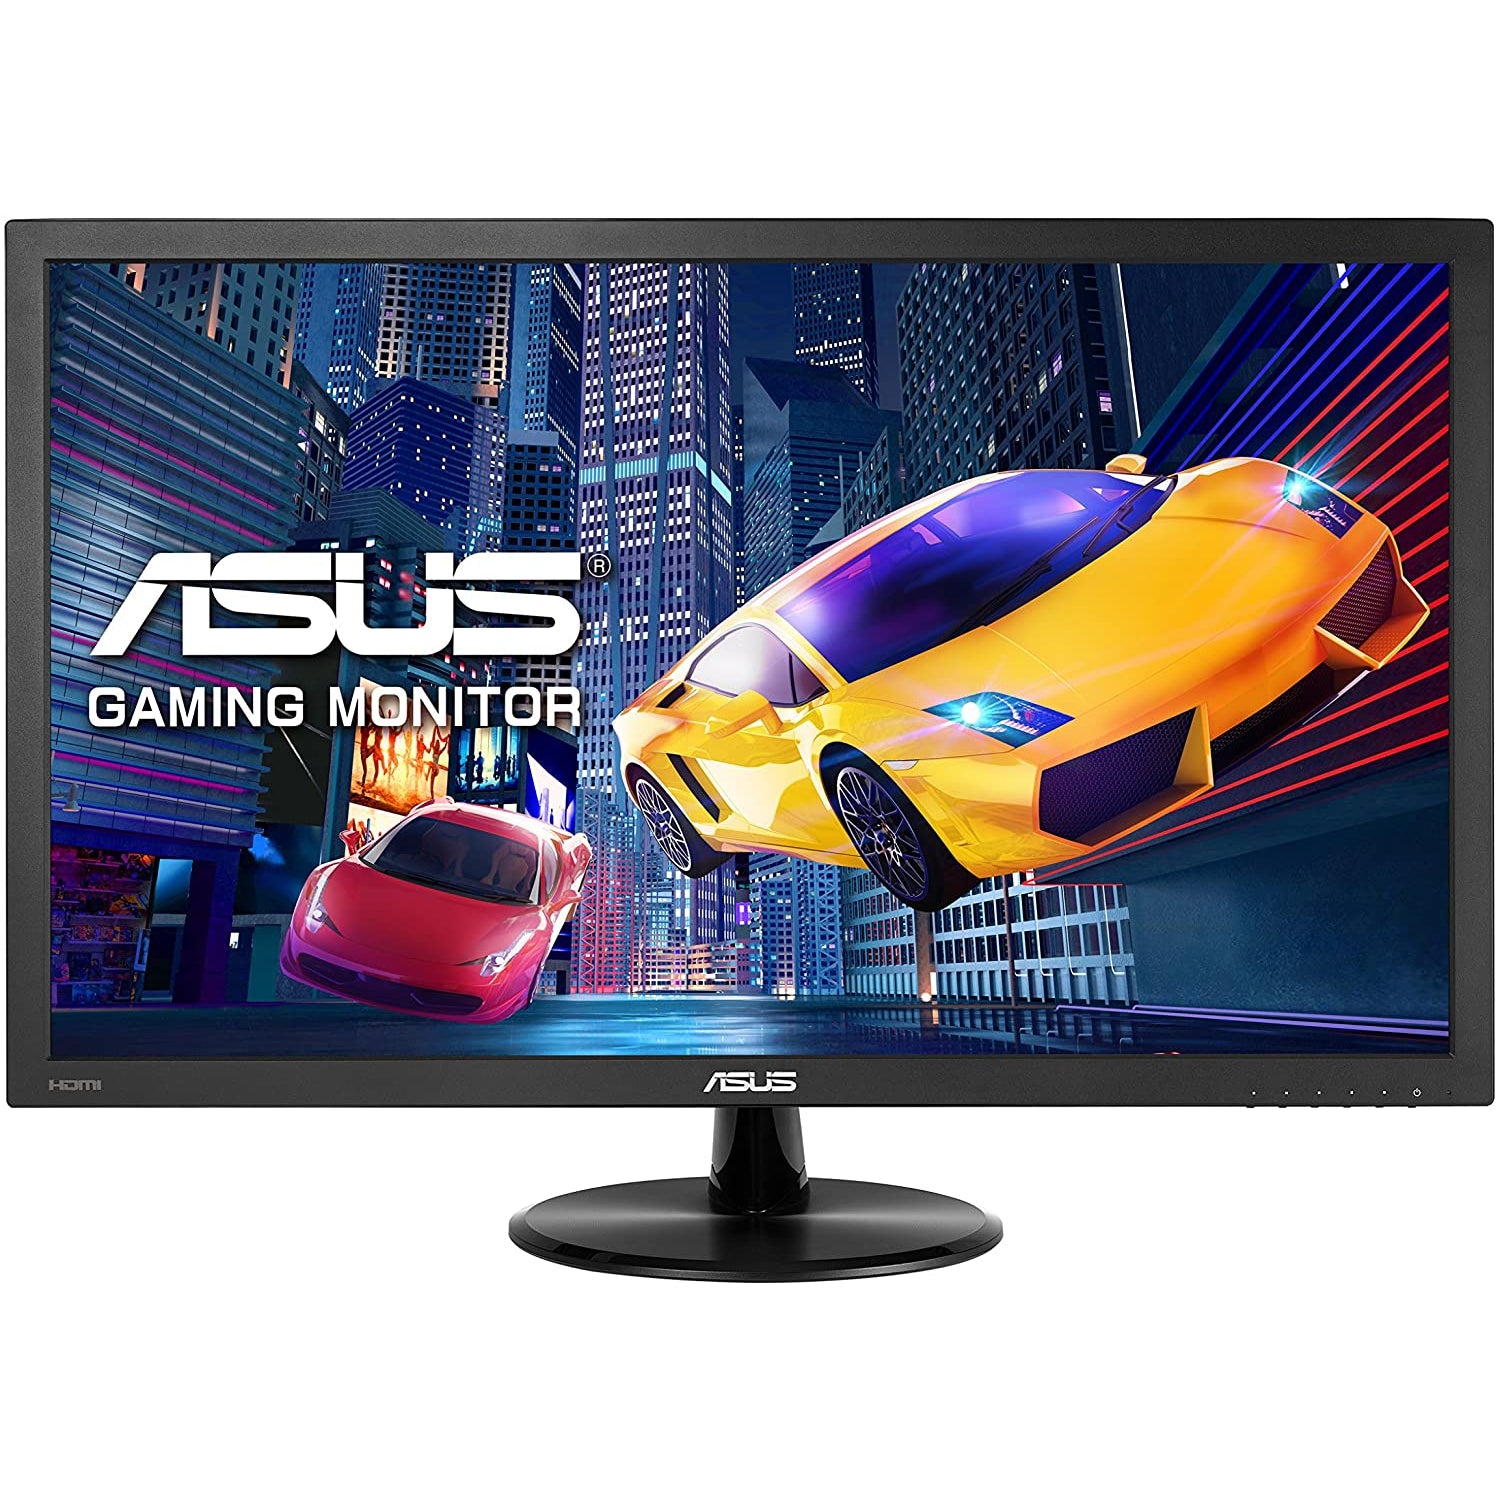 ASUS VP228HE, 21.5 InchFHD (1920x1080) Gaming monitor, 1ms, HDMI, D-Sub , Low Blue Light, Flicker Free, TUV certified